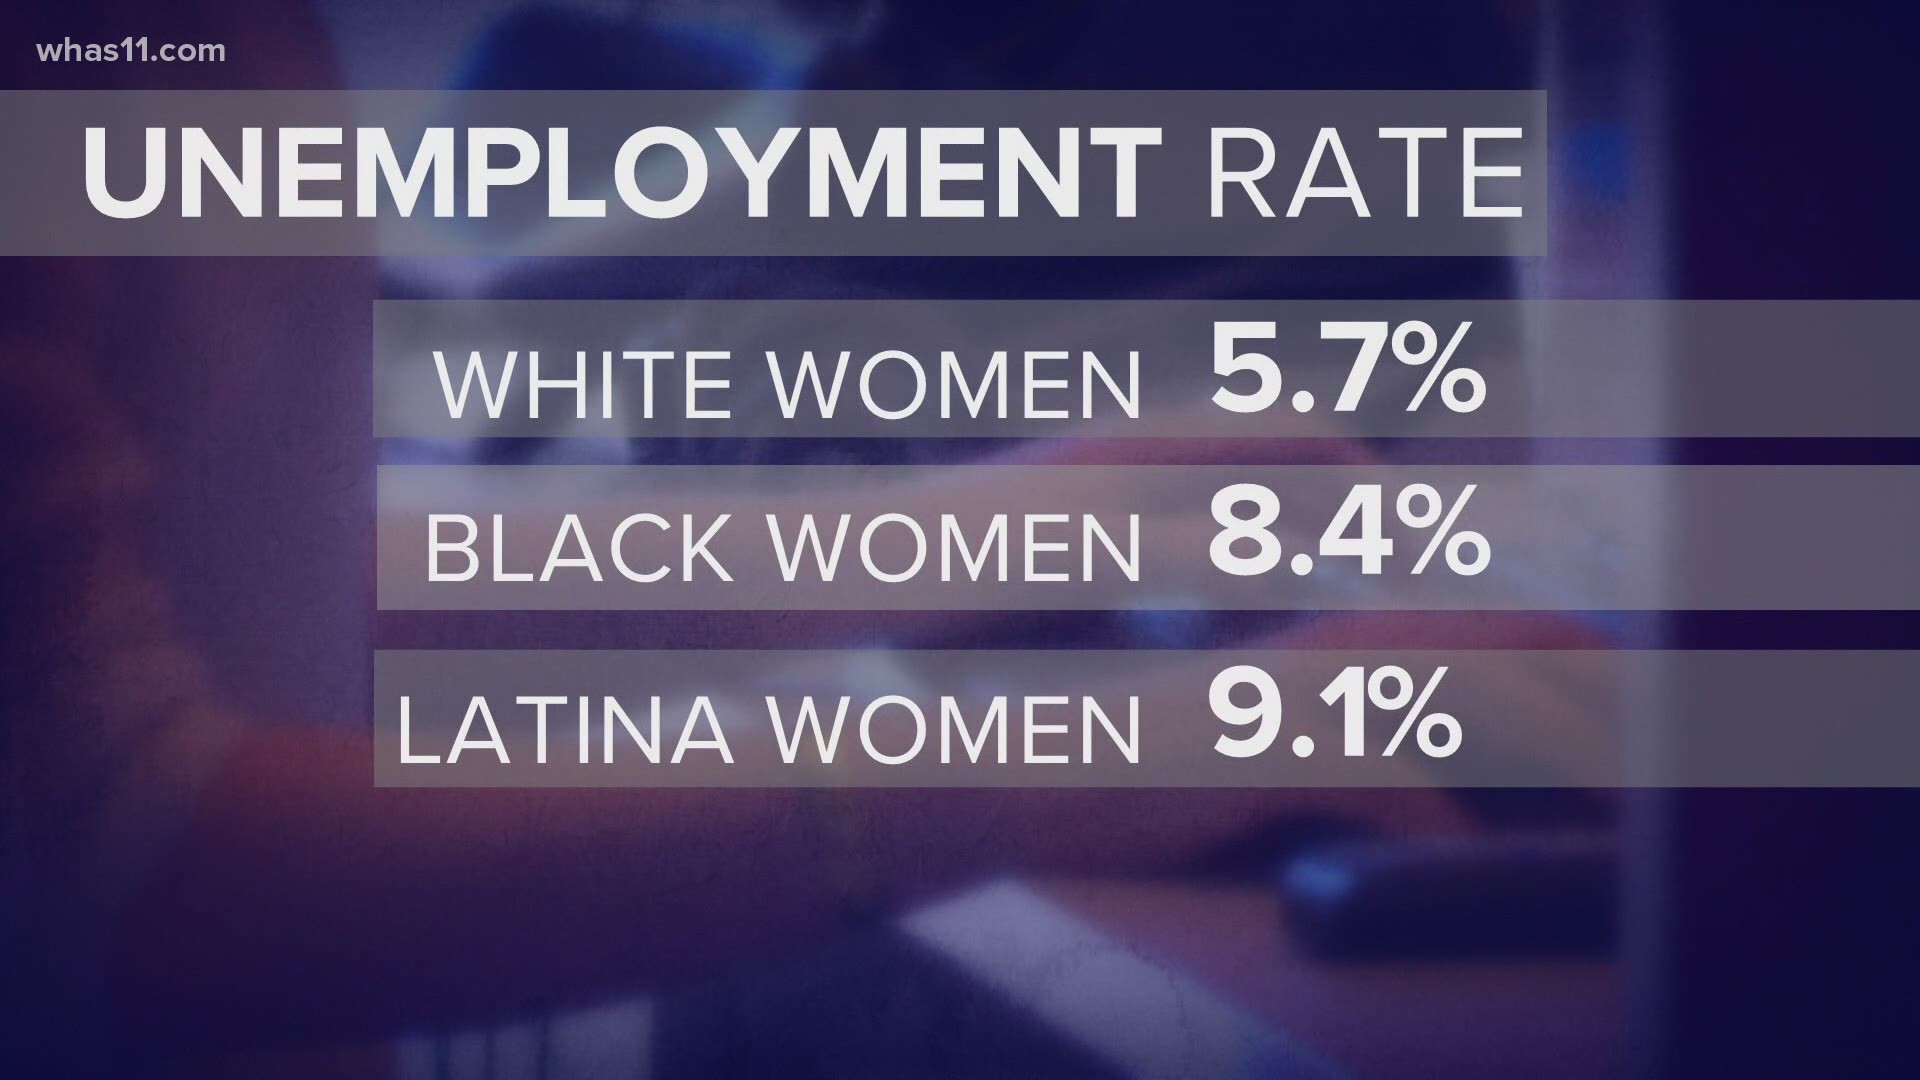 More women lost jobs and left the workforce to end the year, and minority women are being hit hardest.